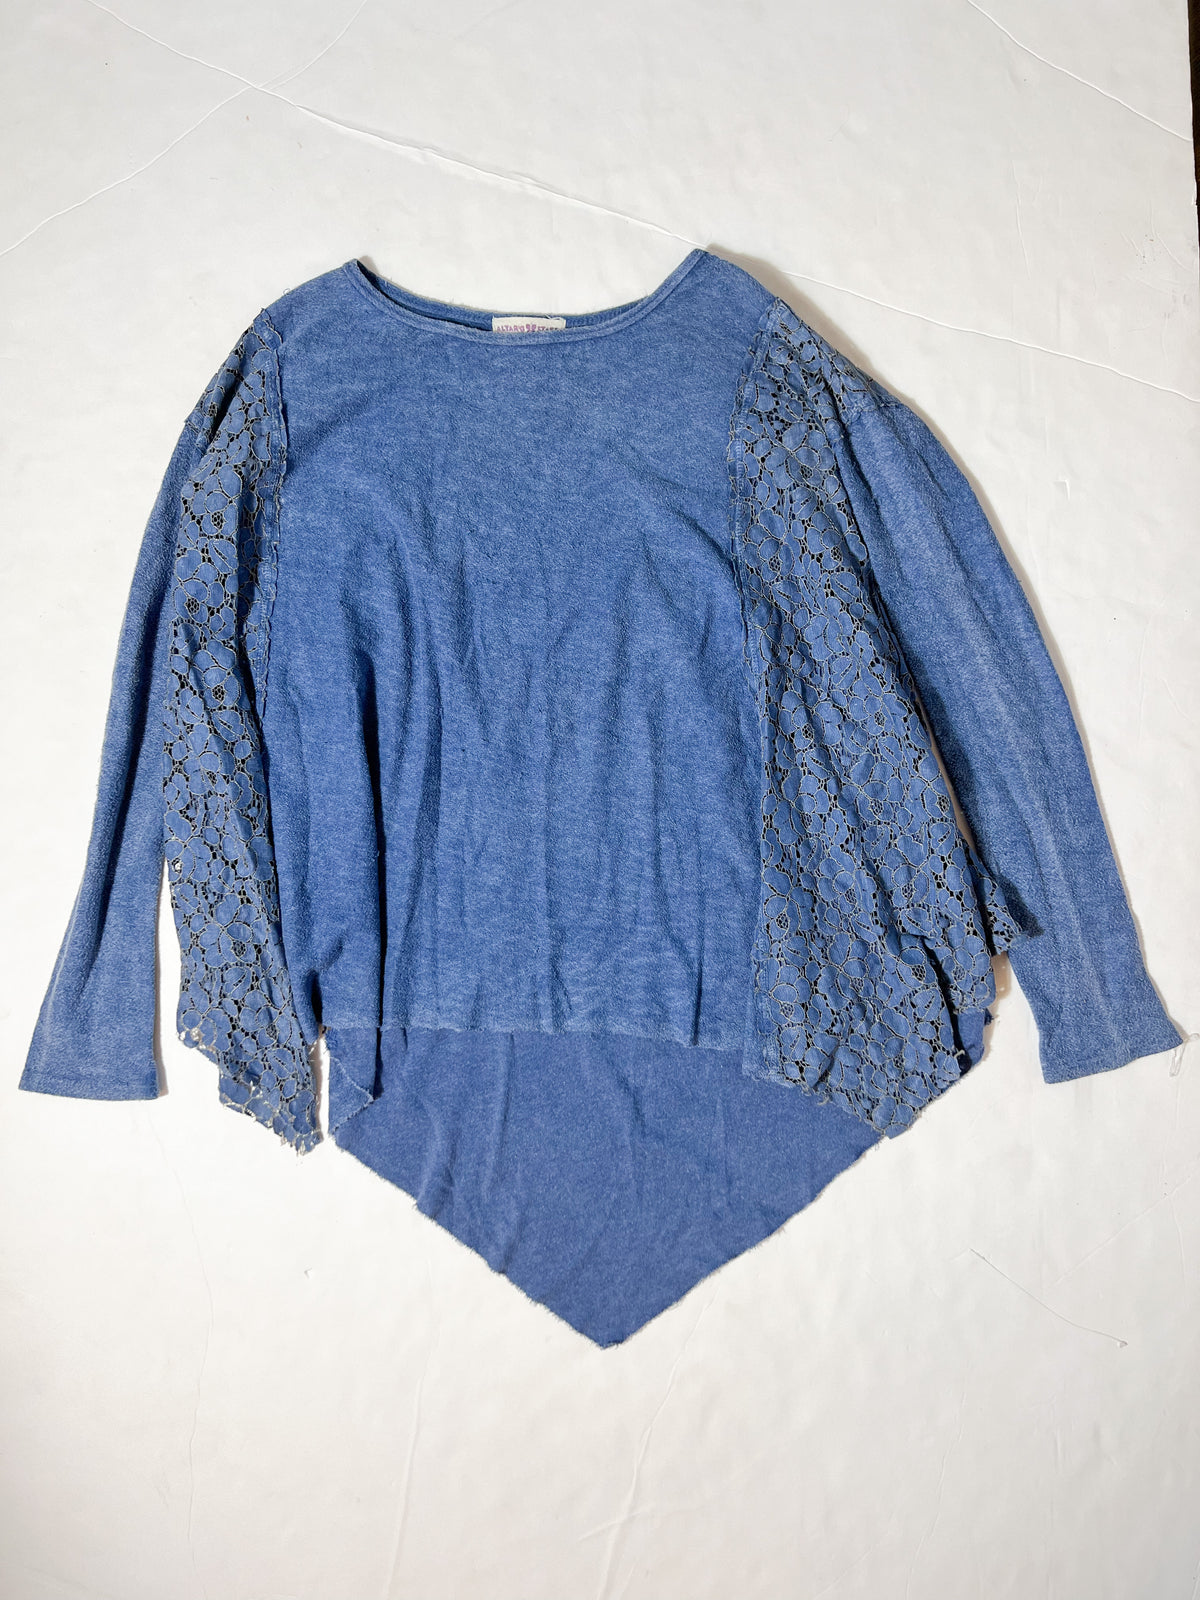 Altar'd State- Blue Lace Long Sleeve